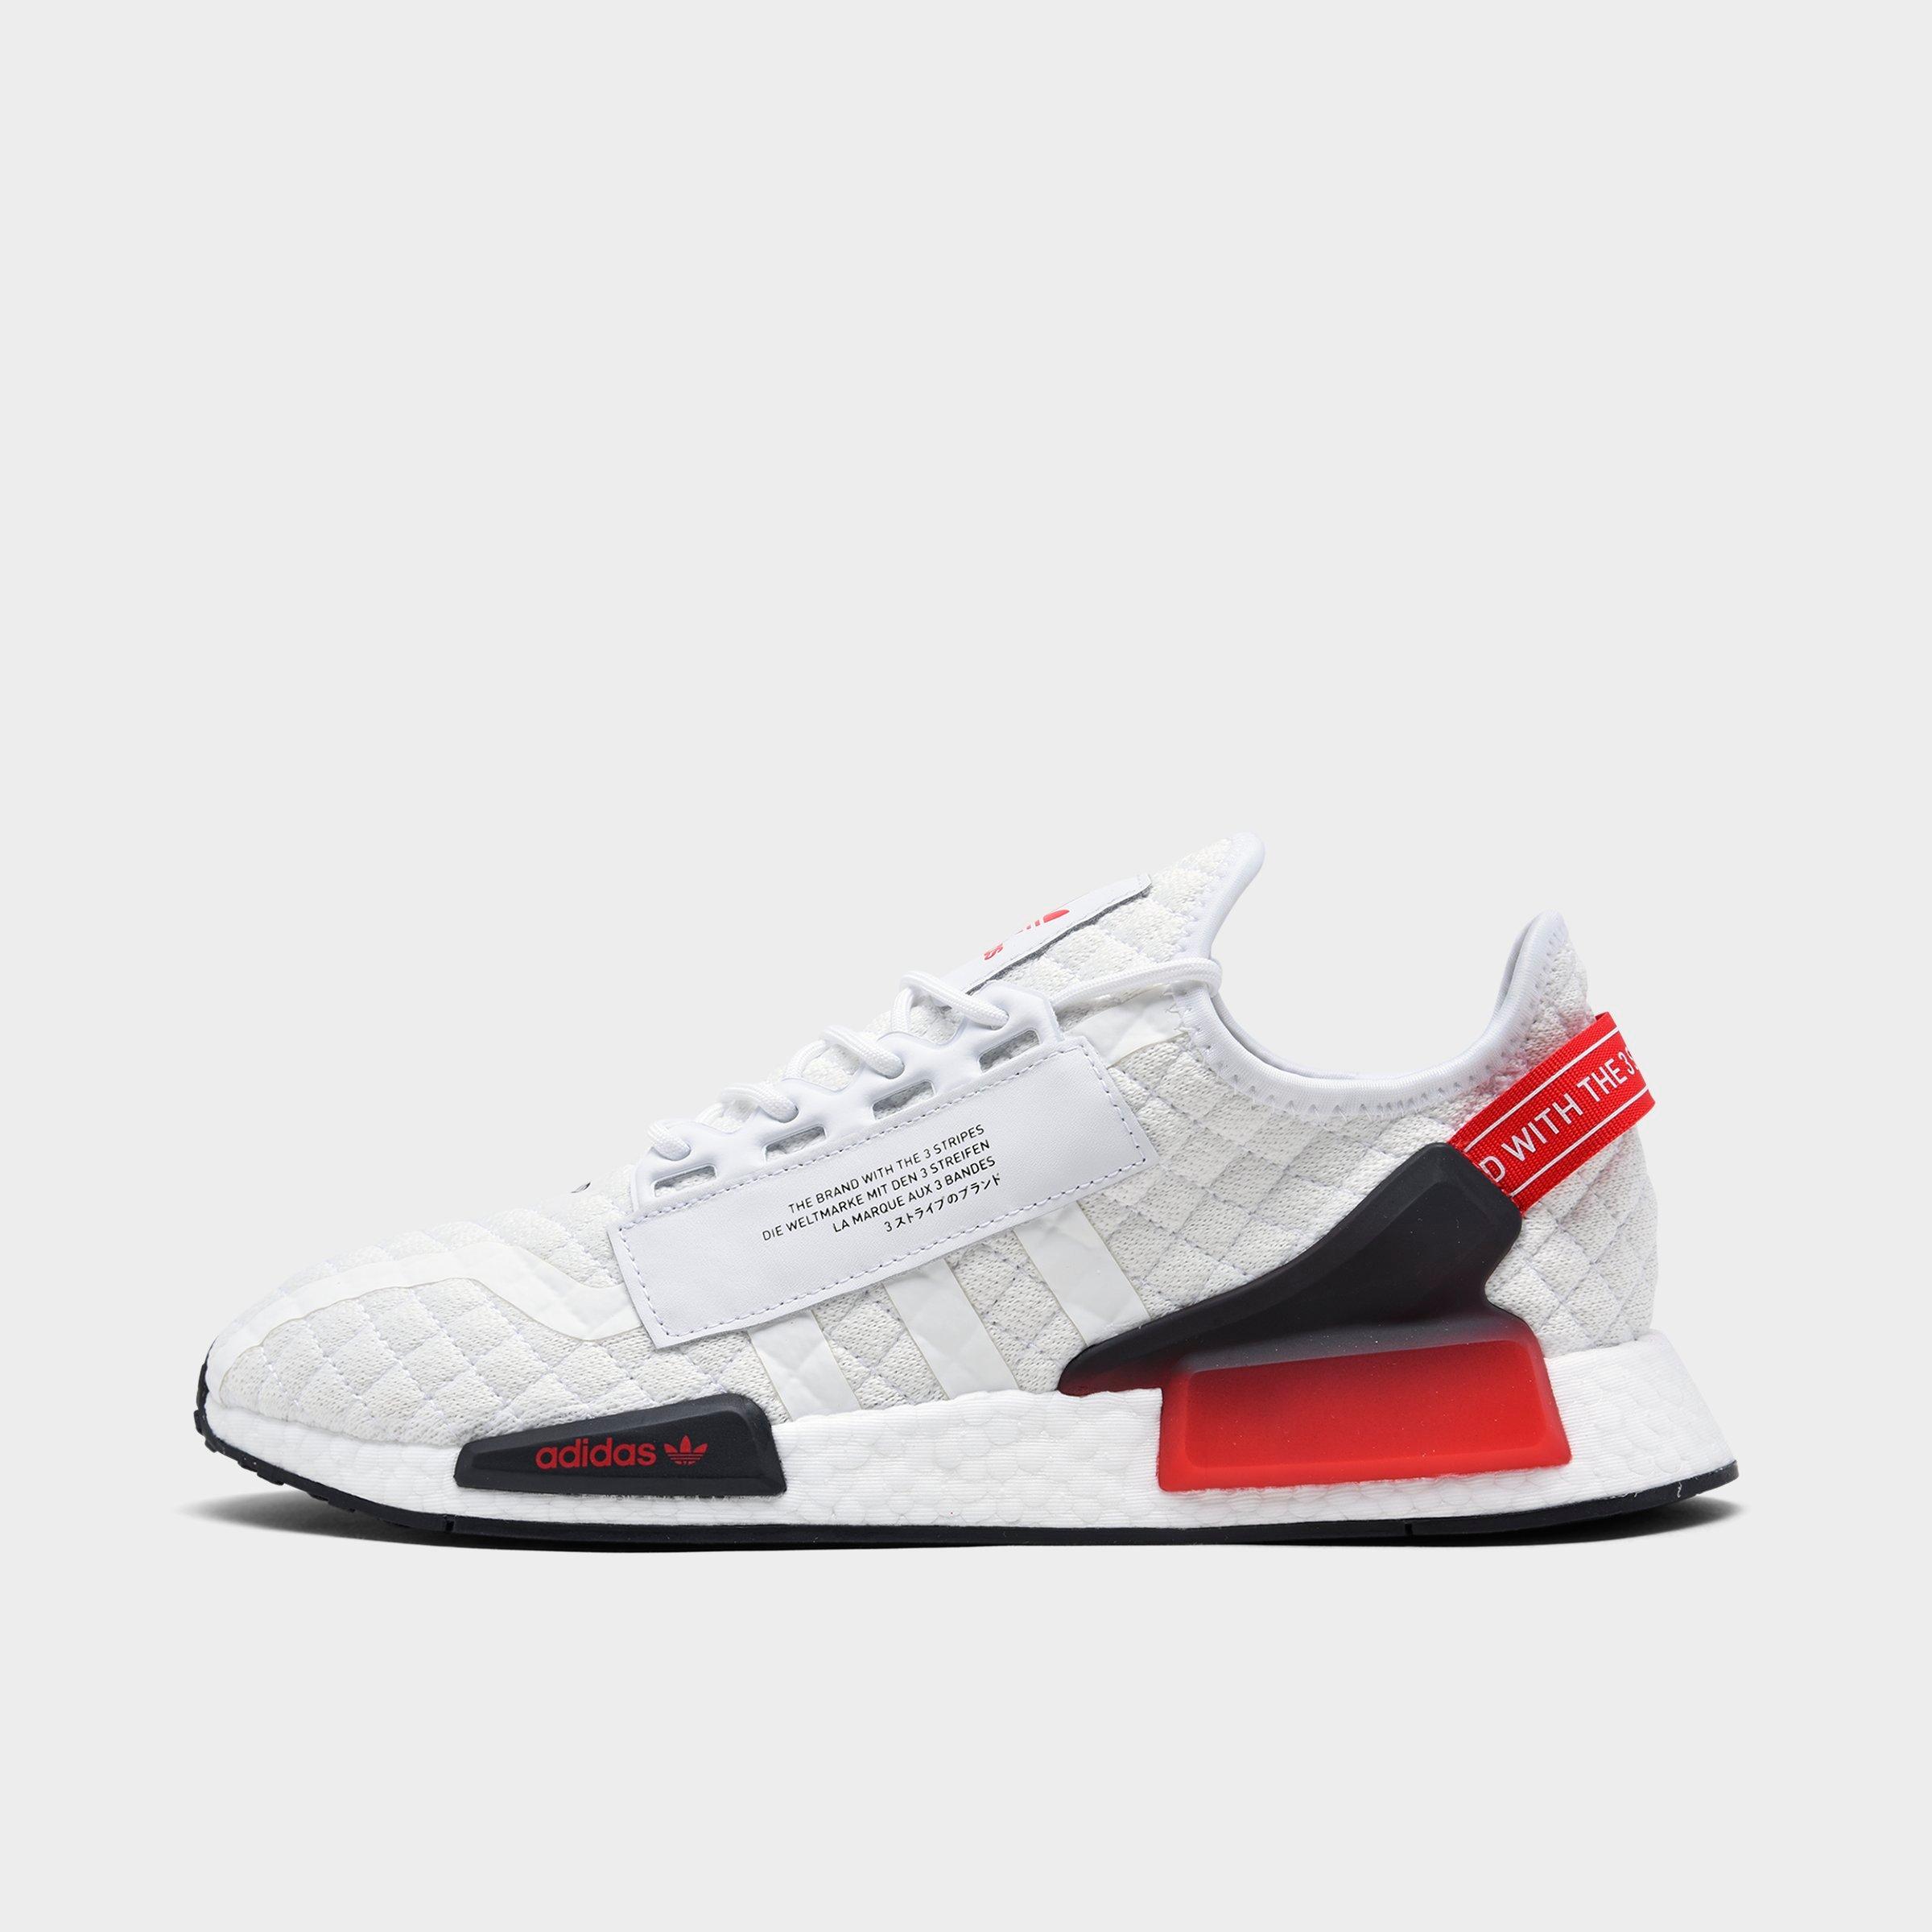 adidas nmd r1 v2 quilted casual shoes Women's